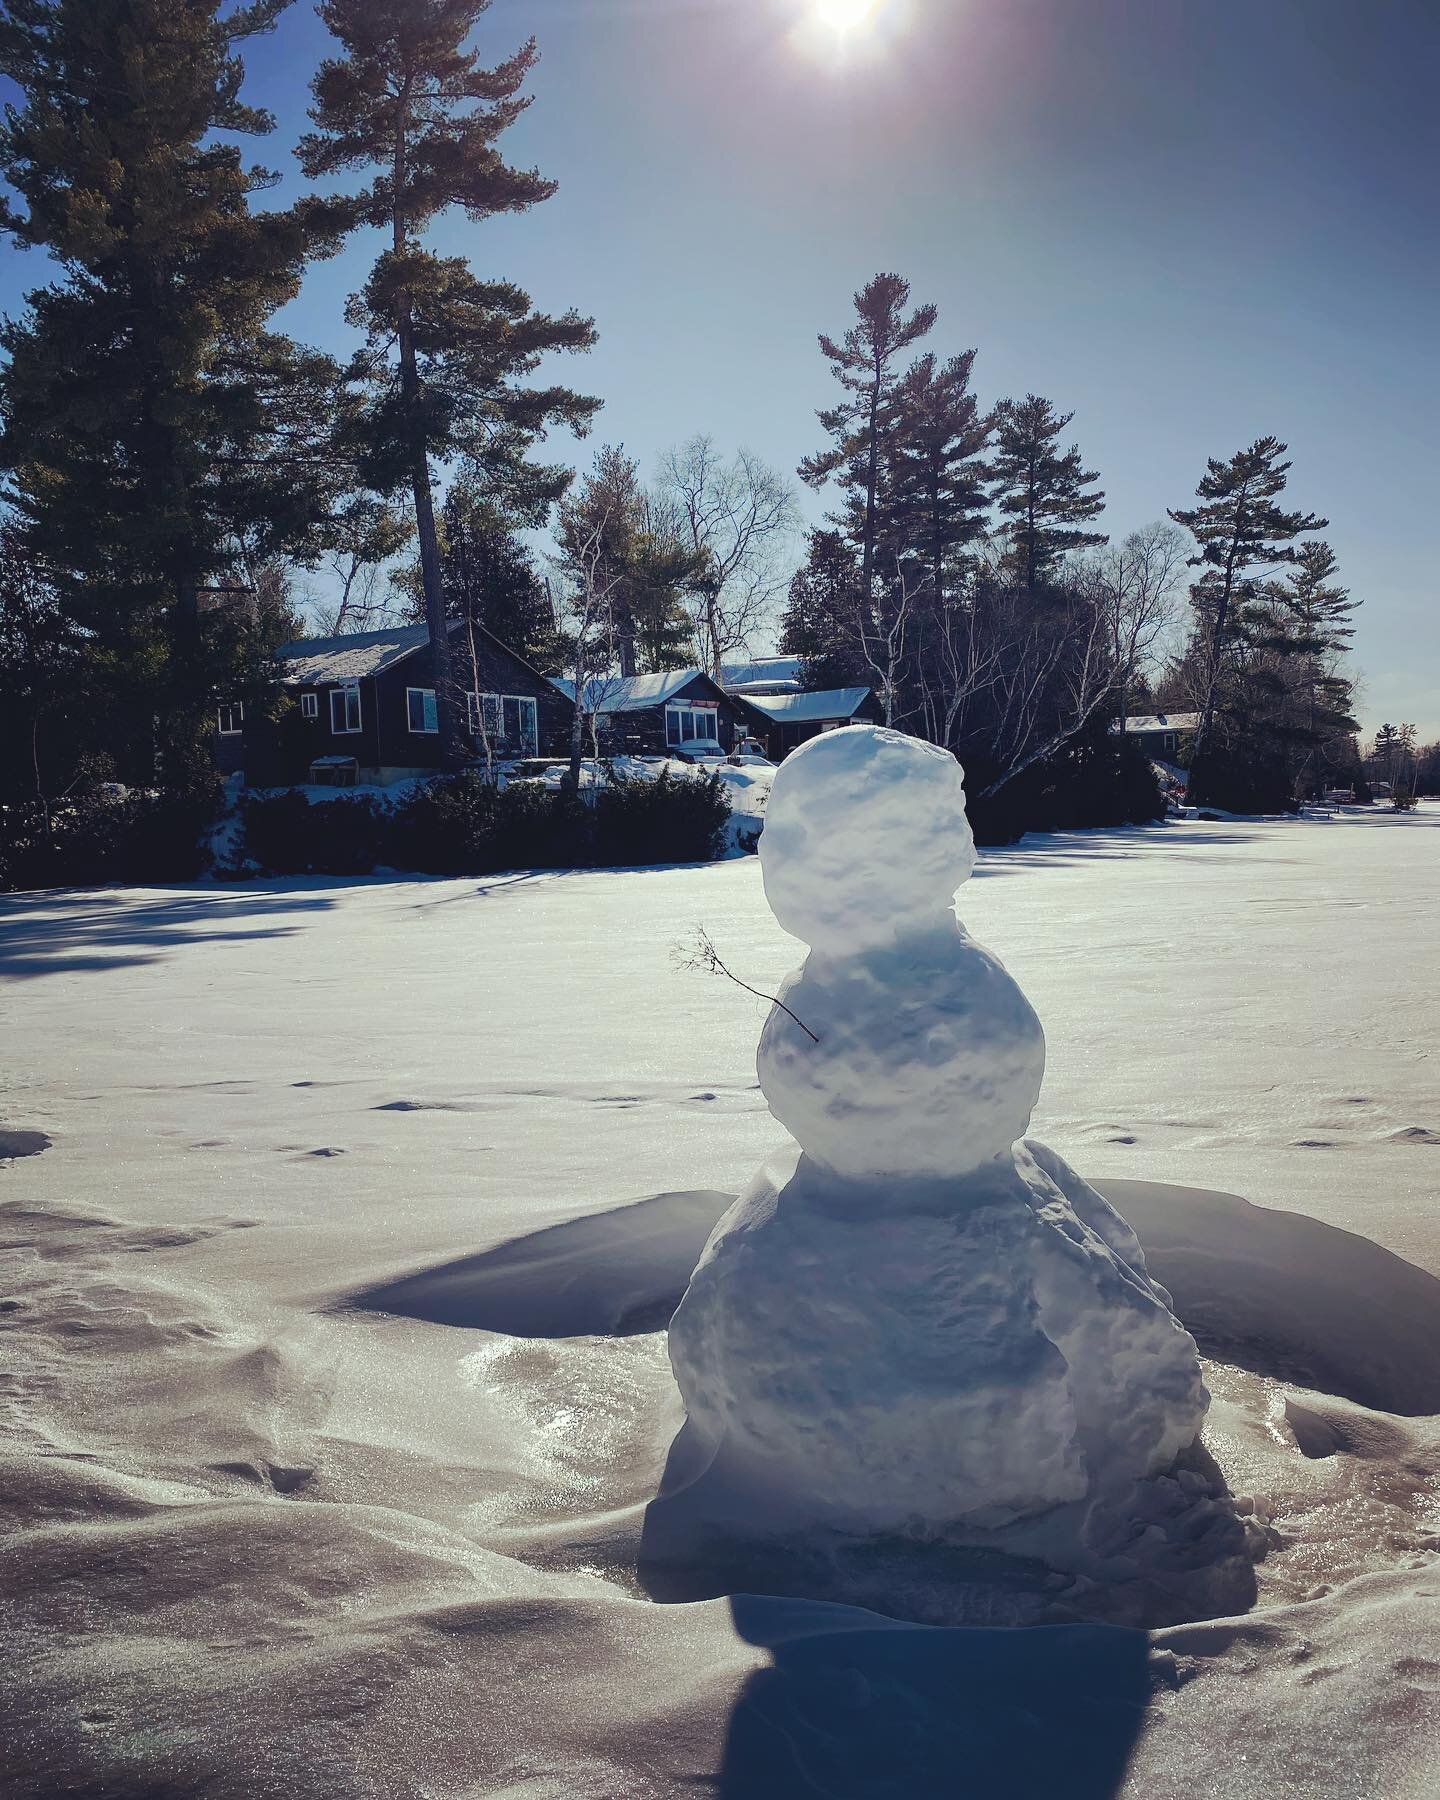 Wanna build a snowman on a frozen lake? Come stay at Cabin 16, where anything&rsquo;s possible if you believe in yourself.
.
.
.
.
.
.
.
.
#northfrontenac #mississagagon #cabin_16 #infrontenac #ontario #yourstodiscover #snowshoeing #winterincanada  #